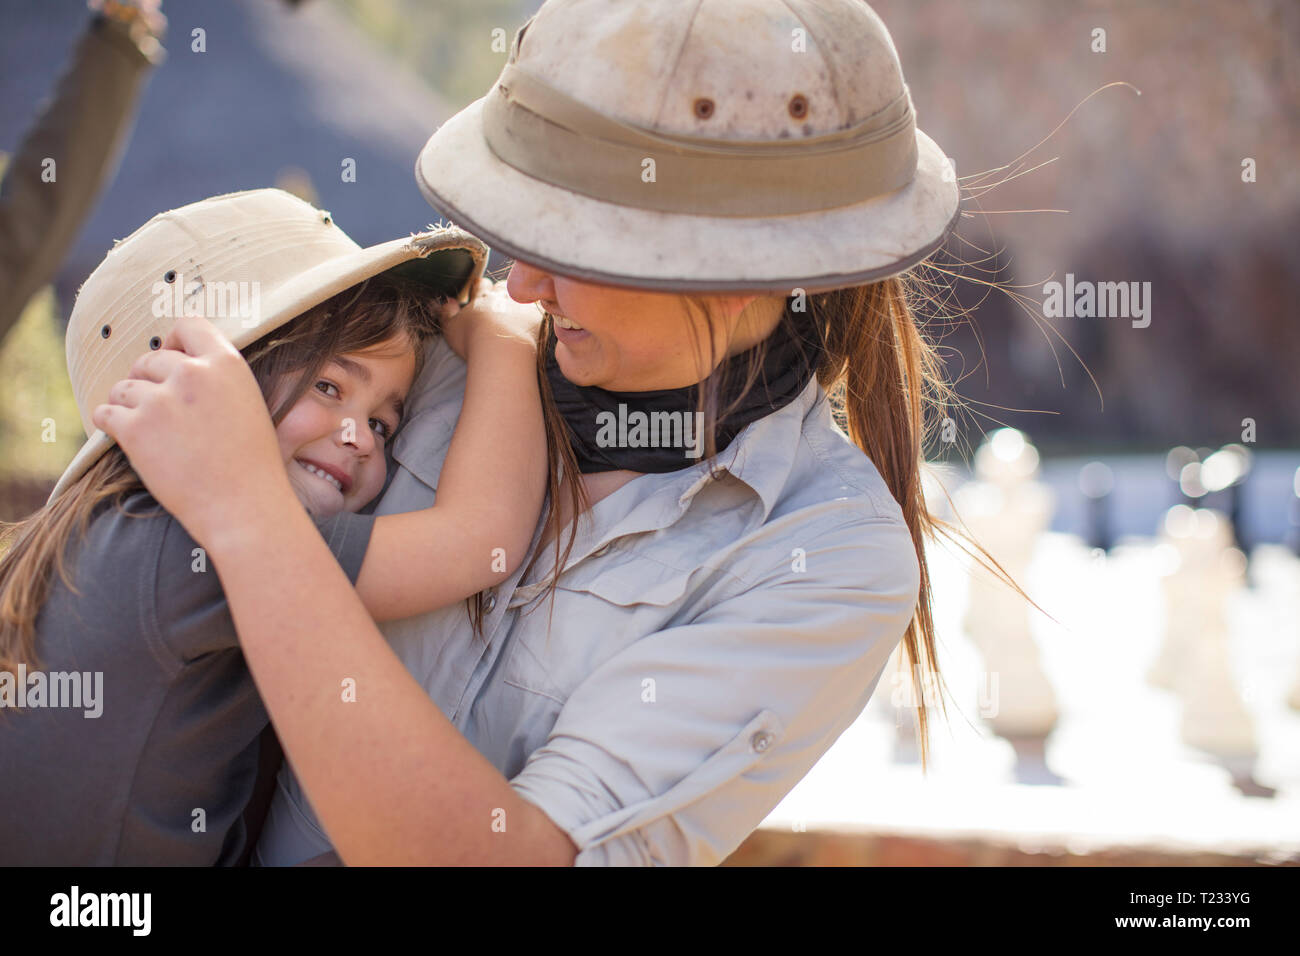 Happy girl embracing woman wearing pith helmet Banque D'Images